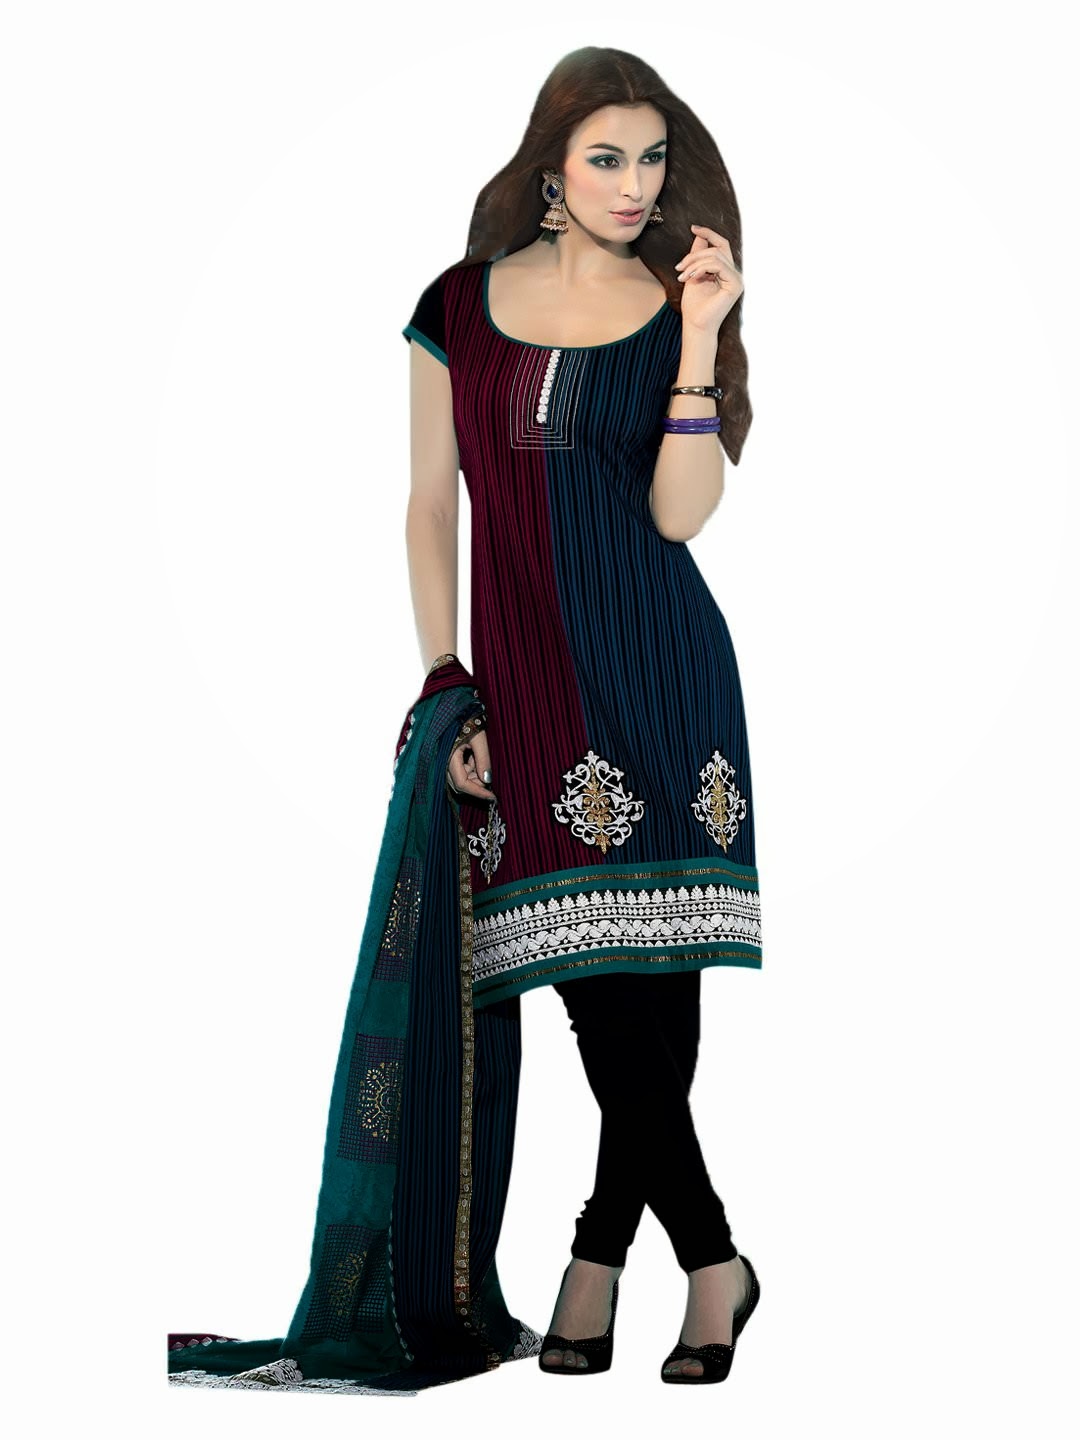 http://linksredirect.com?pub_id=1318CL1274&url=http%3A//www.myntra.com/dress-material/span/span-women-multi-colour-stripe-embroidered-dress-m/102514/buy%3Ft_code%3D90541becd034be46c2a3b5db29cb5a85%26previous_style_id%3D102508%26previous_recommendation_type%3Davail%26previous_recommendation_styleids%3D102514%2C127287%2C127305%2C110525%2C102501%26src%3Dpp